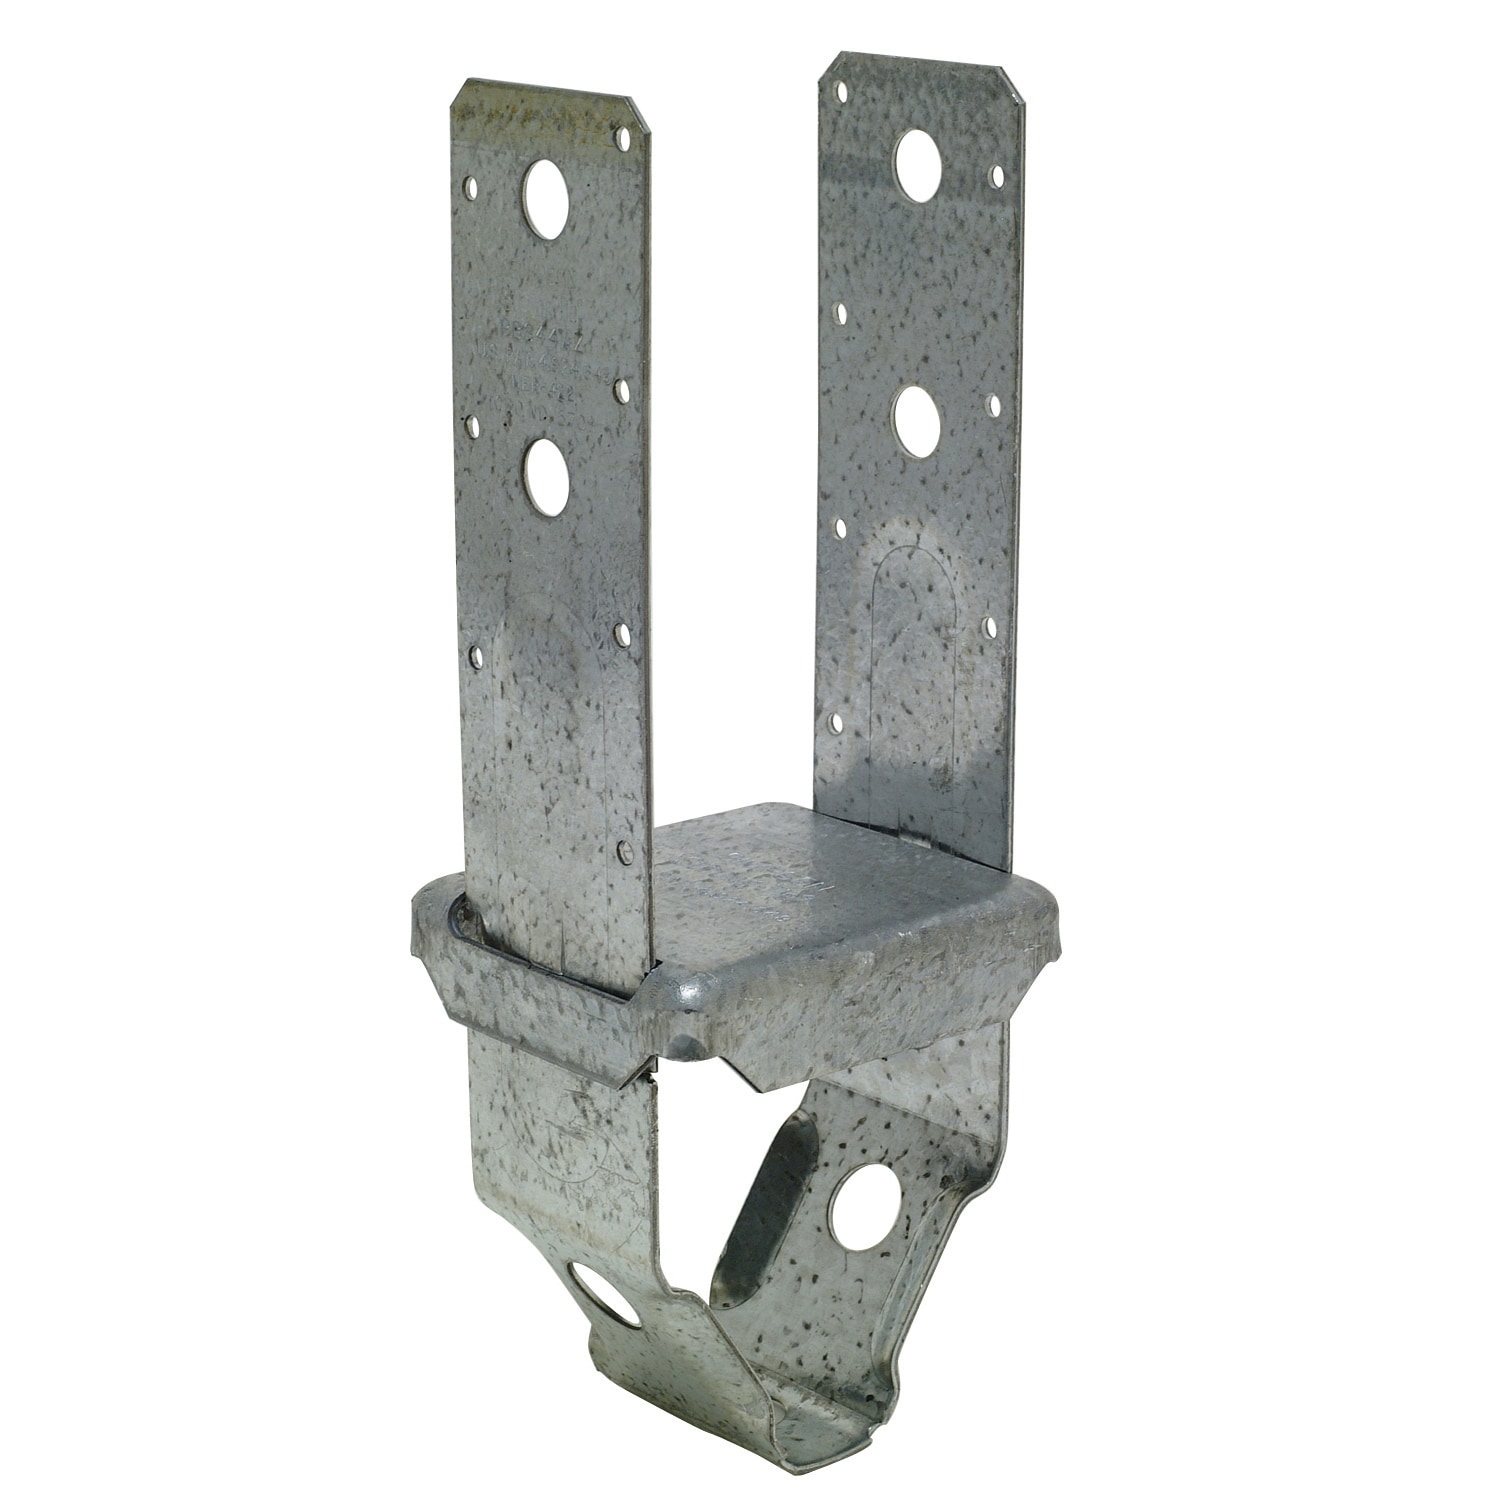 4-Piece Square Break Up Bar Mold - Tomric Systems, Inc.